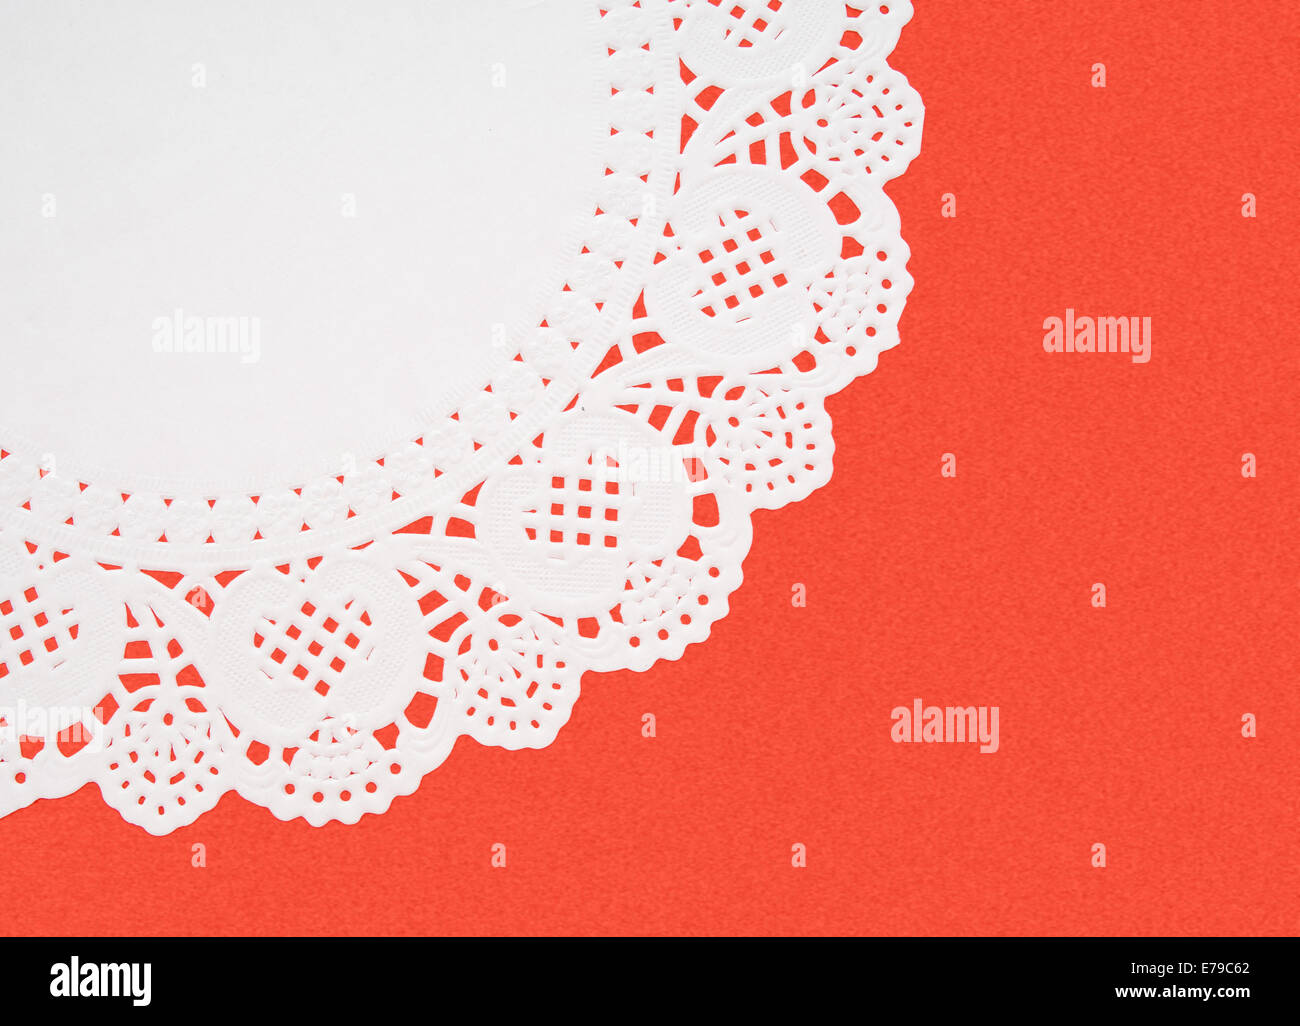 Curved doily edging, background. Stock Photo